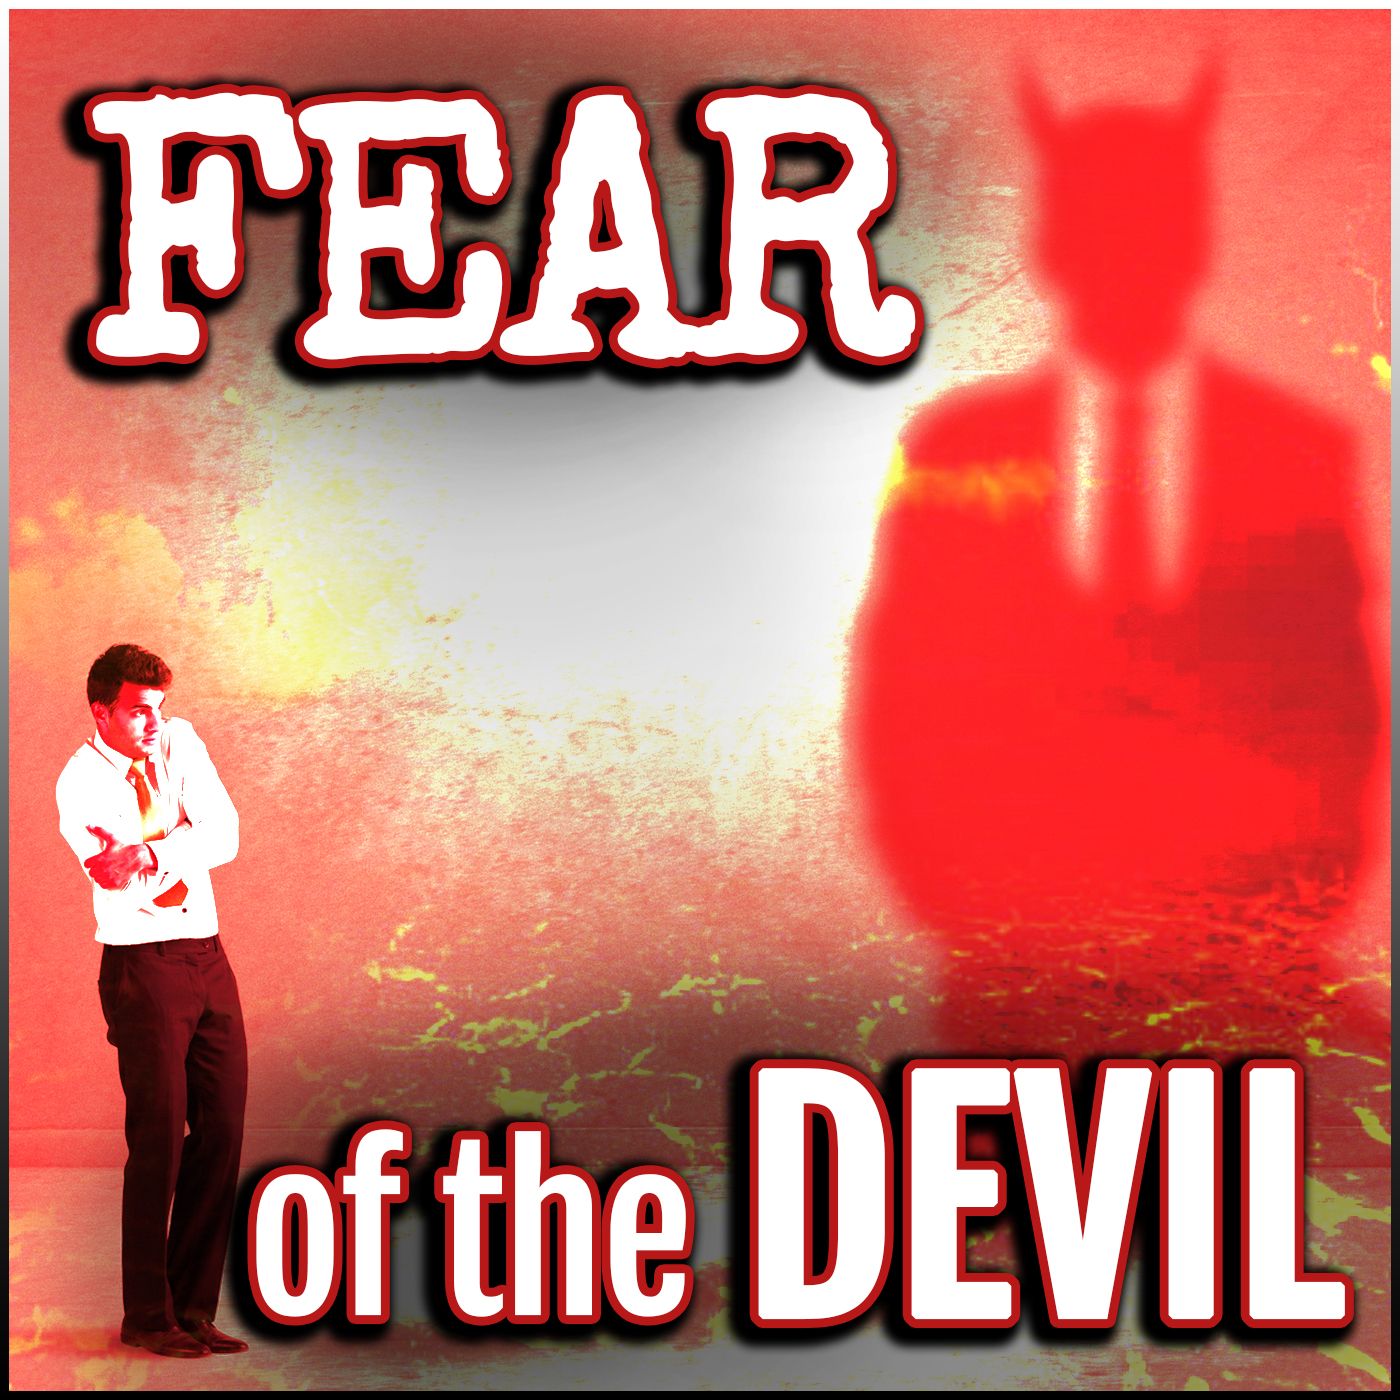 Fear of the Devil: Paranoia and Panic by the 